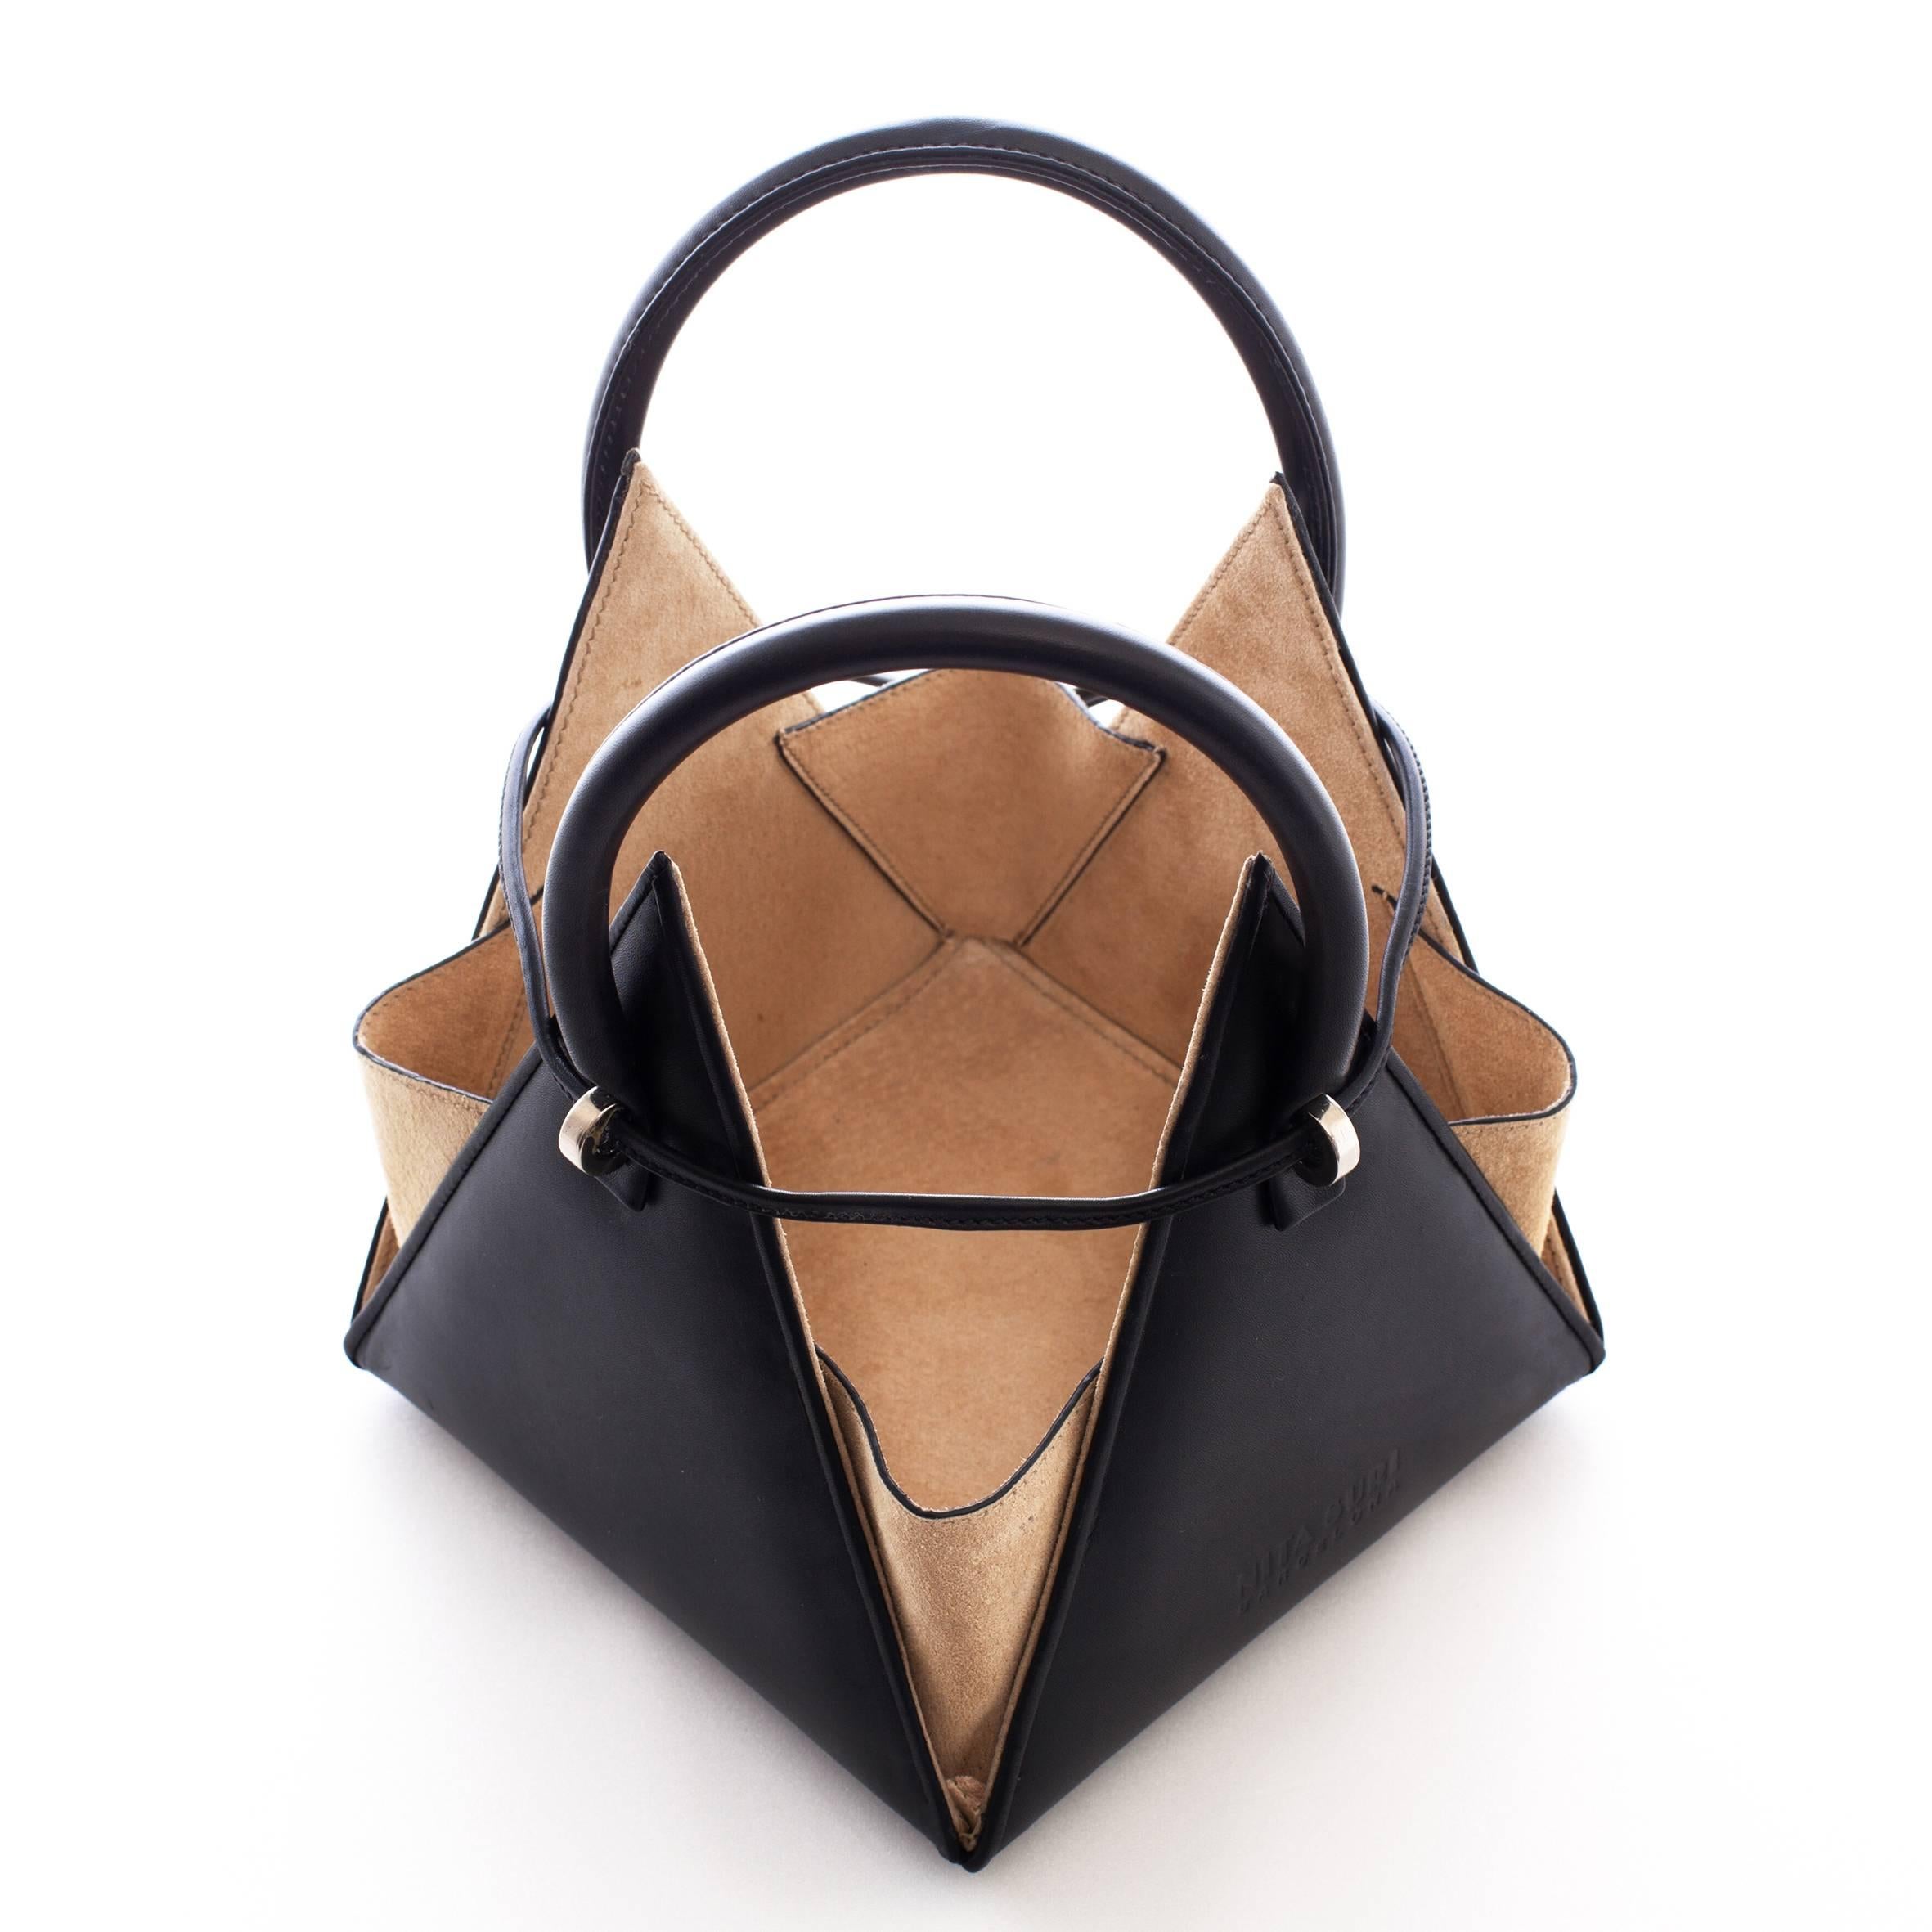 *Preorder* Estimated delivery: December 20th 2017

This Nita Suri bag is rendered in calf leather and features a pyramid silhouette.

Product Details
Unique geometric silhouette
Dual top handles
Suede lining
Composition: Calf and Sheep